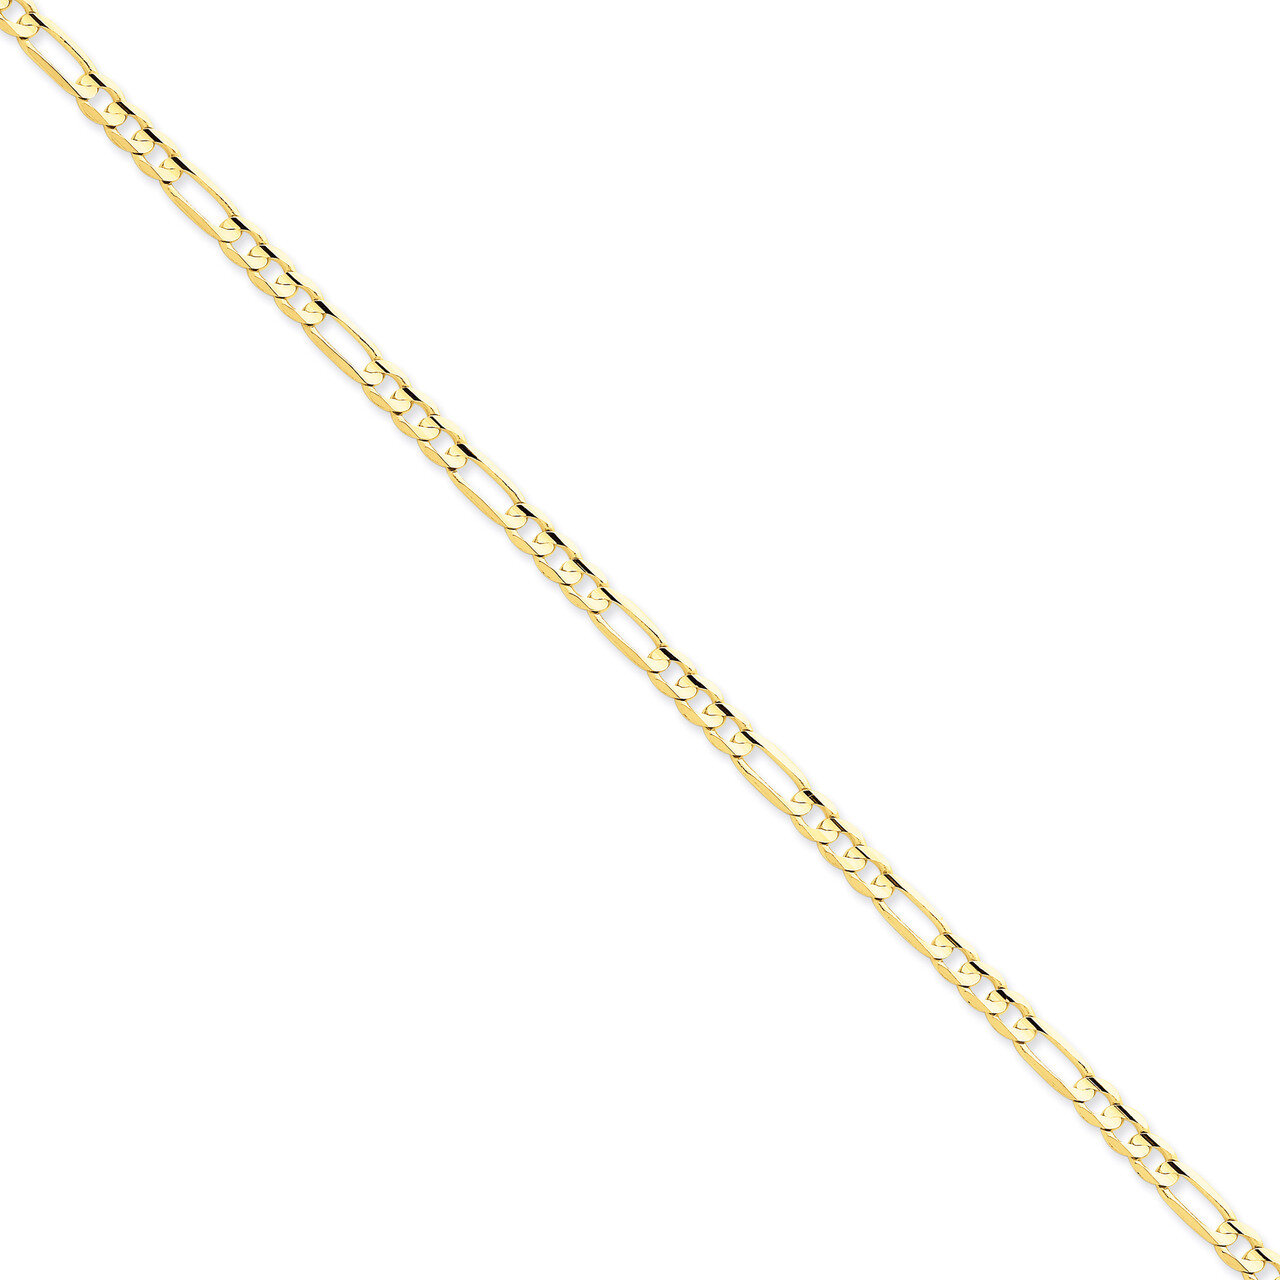 4.5mm Concave Open Figaro Chain 20 Inch 14k Gold LFG120-20